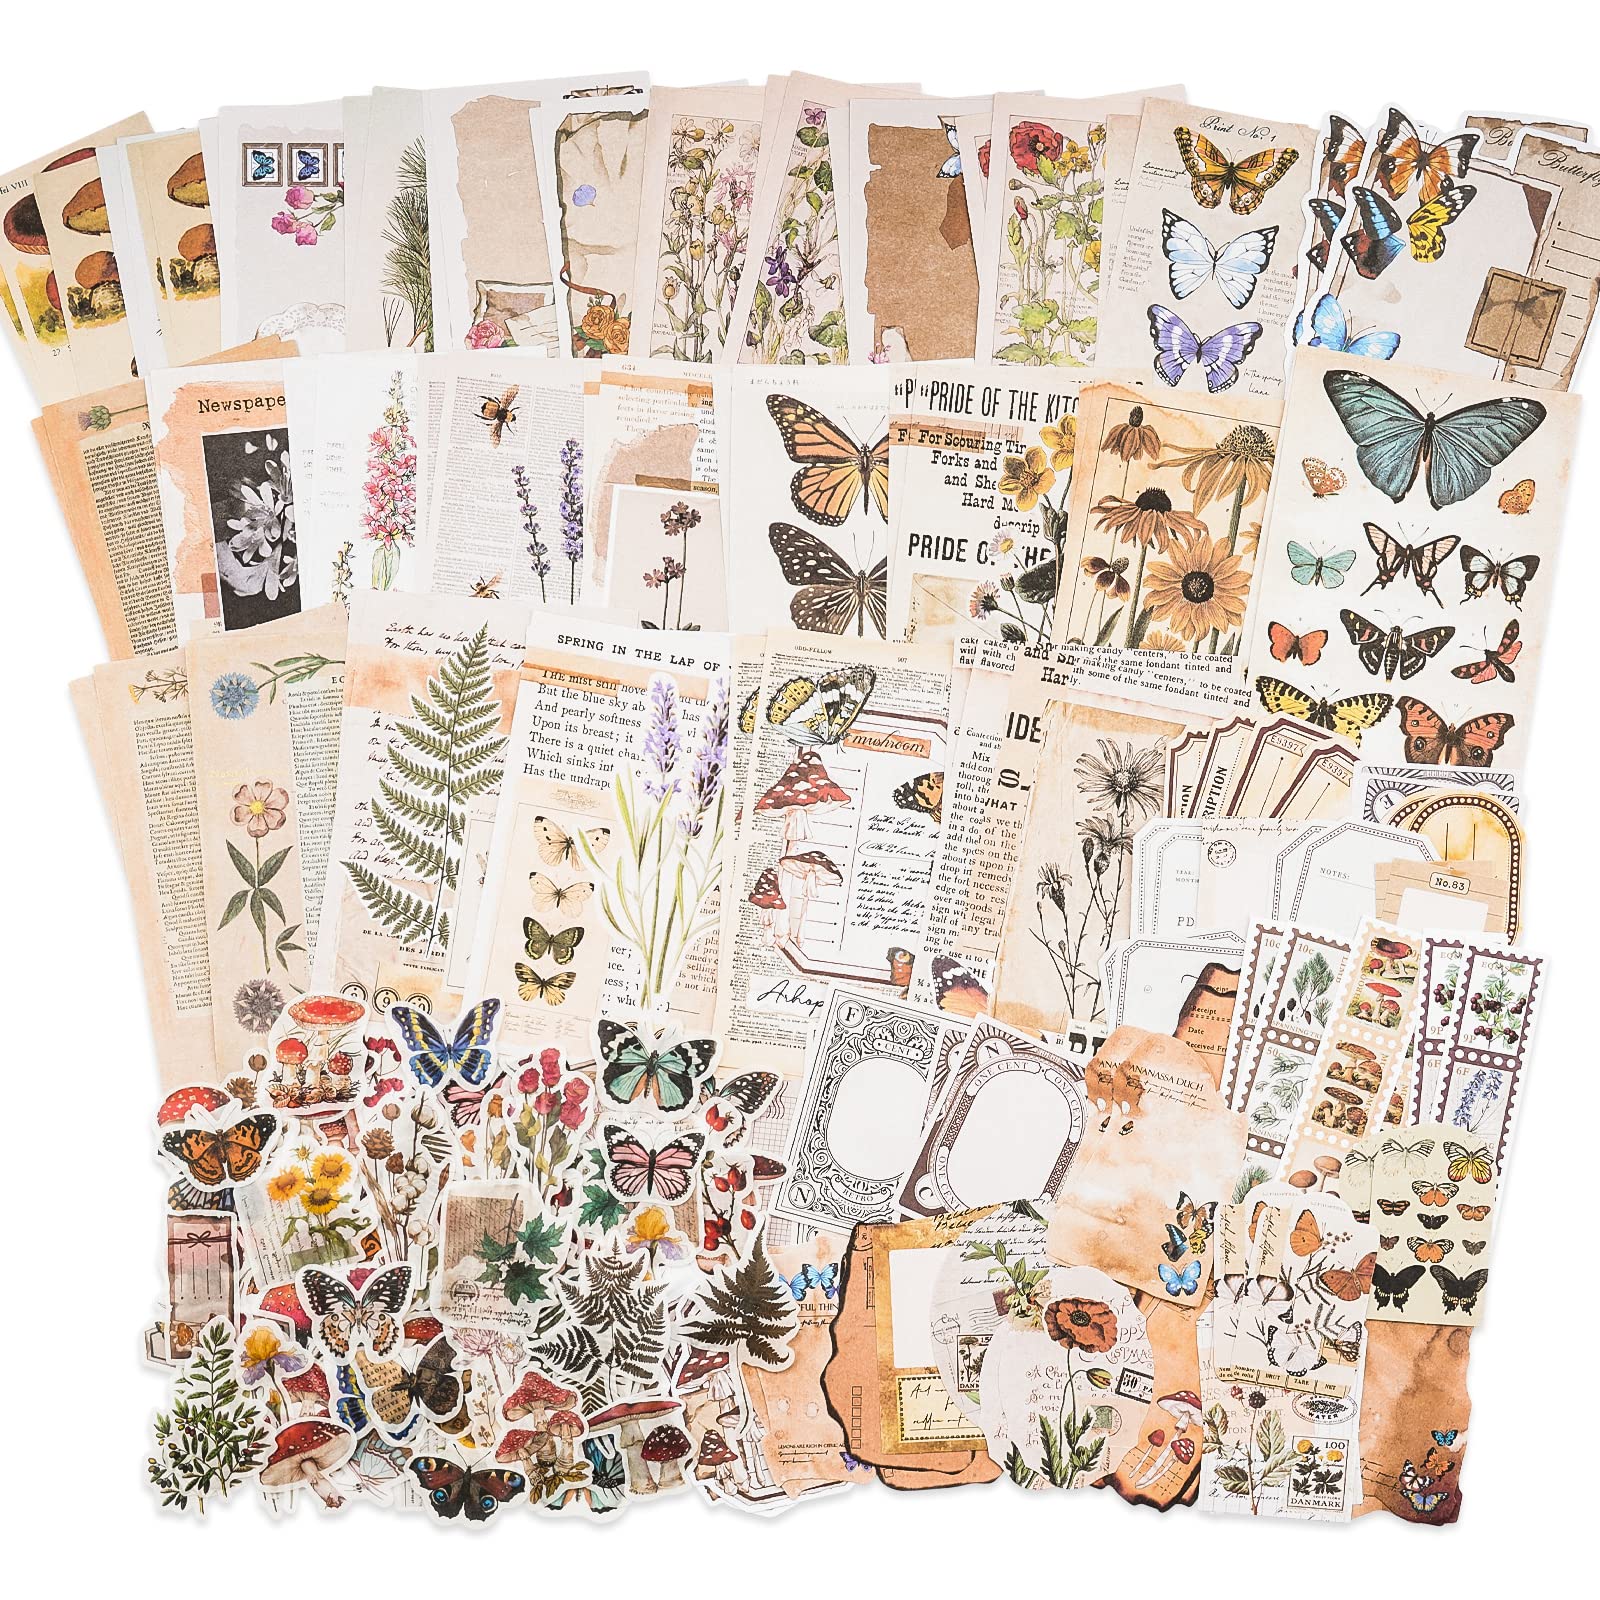 6 Sheets of Journal Stickers. Journaling Stickers, Scrapbook Supplies,  Paper Stickers, Stationery, Journaling Supplies 